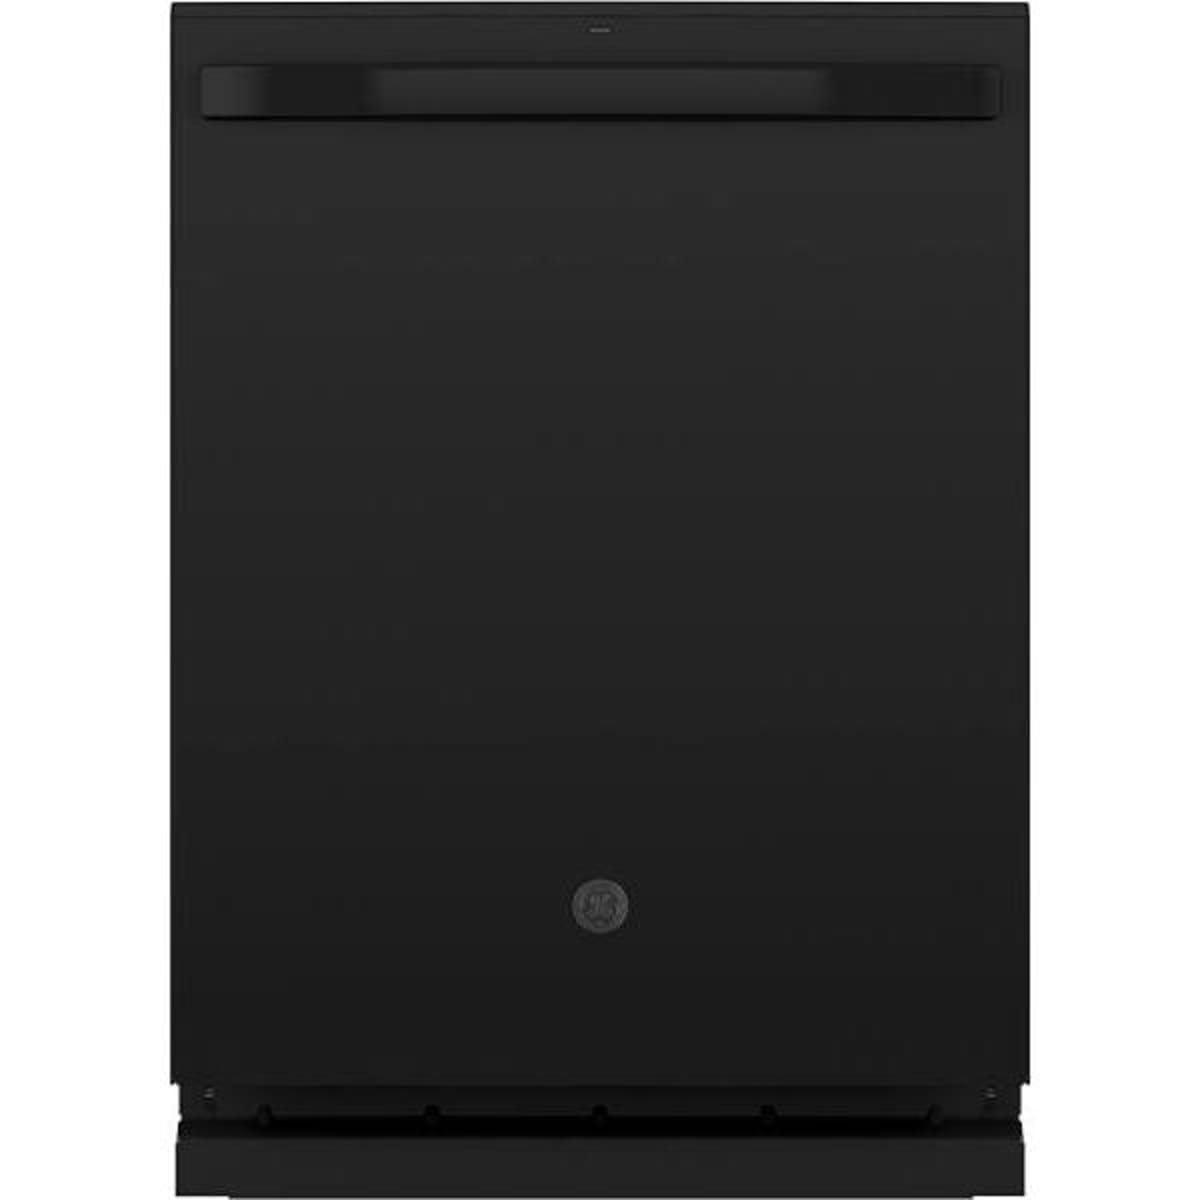 GE Top Control with Plastic Interior Dishwasher, Stainless Steel